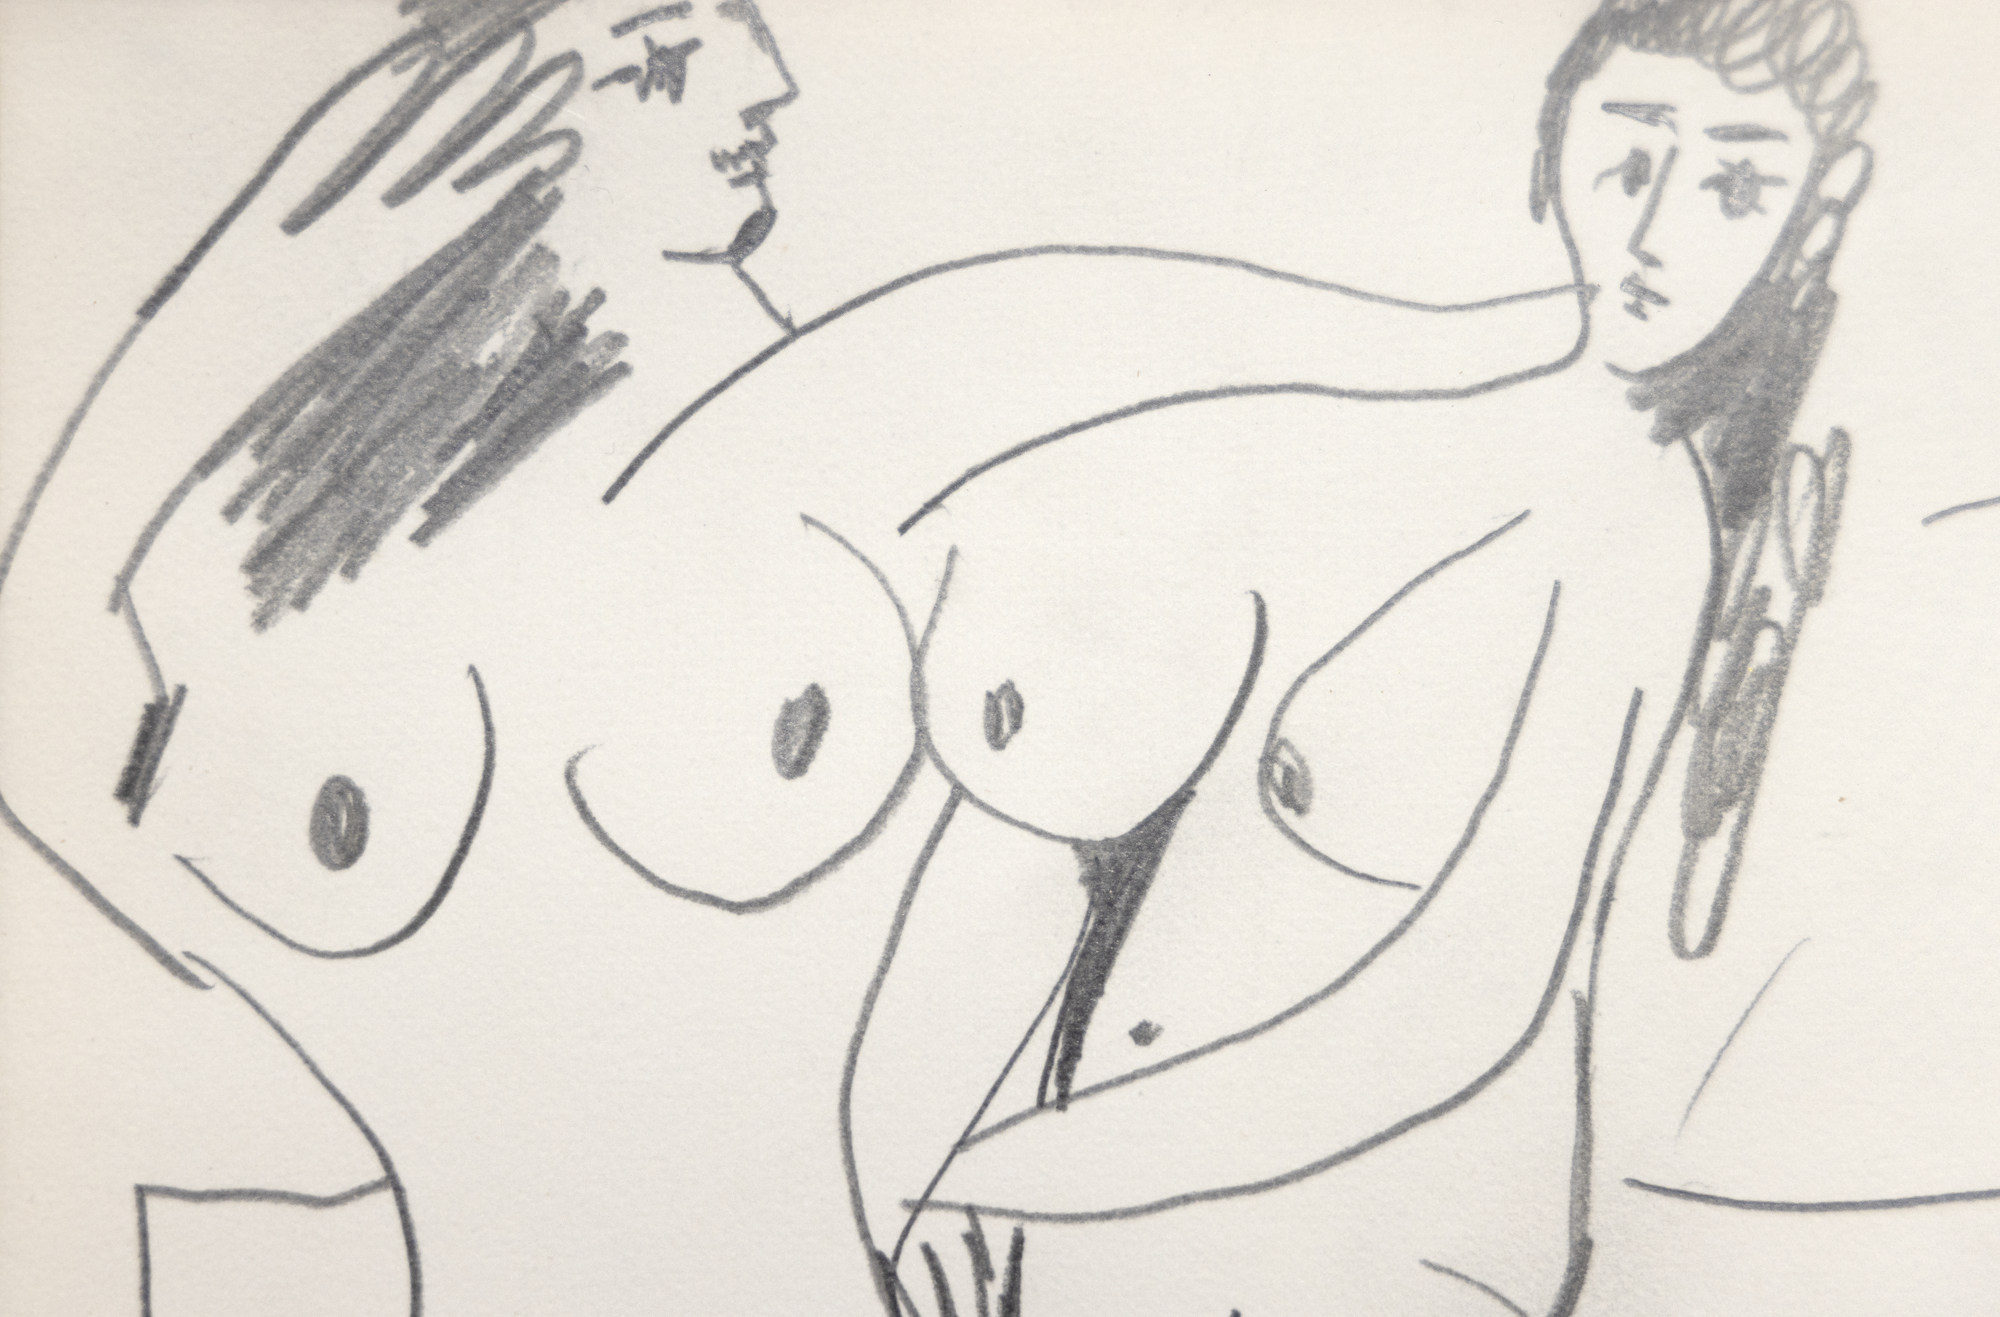 The figures of Nues are freely developed around a central odalisque figure in a manner that suggests a theme that occupied Picasso as early as 1906   that of female indulgences within a harem setting.  In describing his late drawings, Picasso noted that, “one never knows what’s going to come out, but as soon as the drawing gets underway, a story or an idea is born… I spend hour after hour while I draw, observing my creatures and thinking about the mad things they’re up to… It’s great fun, believe me.” Nues is evocative of that appraisal, a freewheeling frolic as only Picasso can achieve. Among the many poses, the abbreviated figure swimming in the pool is particularly charming.